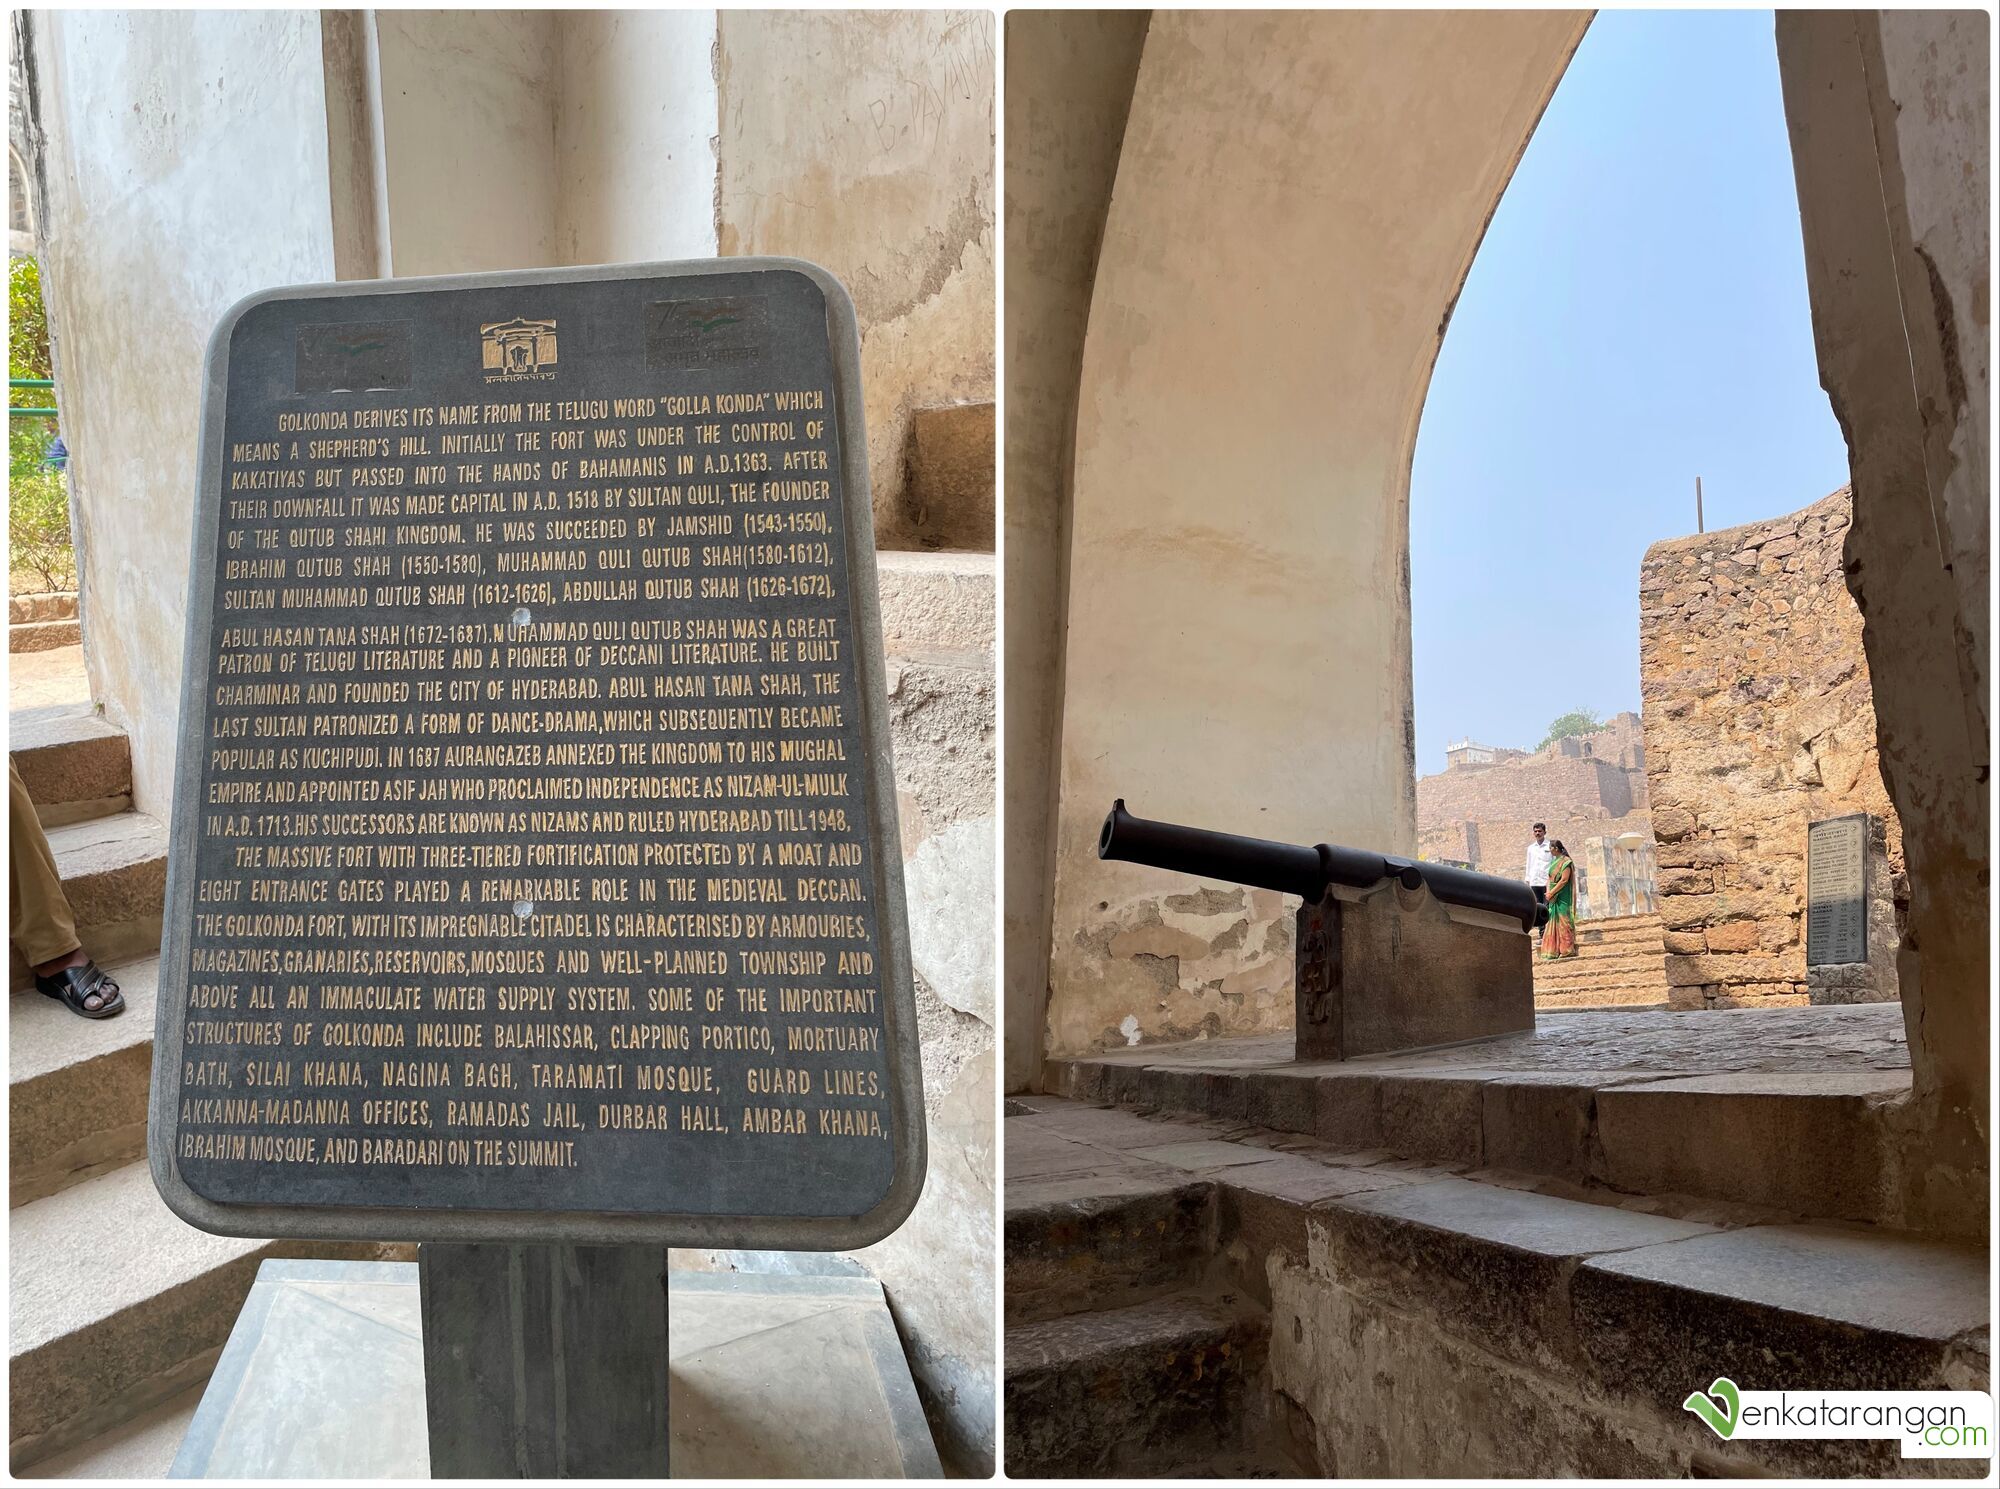 Golconda Fort (Telugu: shepherds hill), is a fortified citadel built by the Qutb Shahi dynasty (c. 1512–1687), located in Hyderabad, Telangana, India